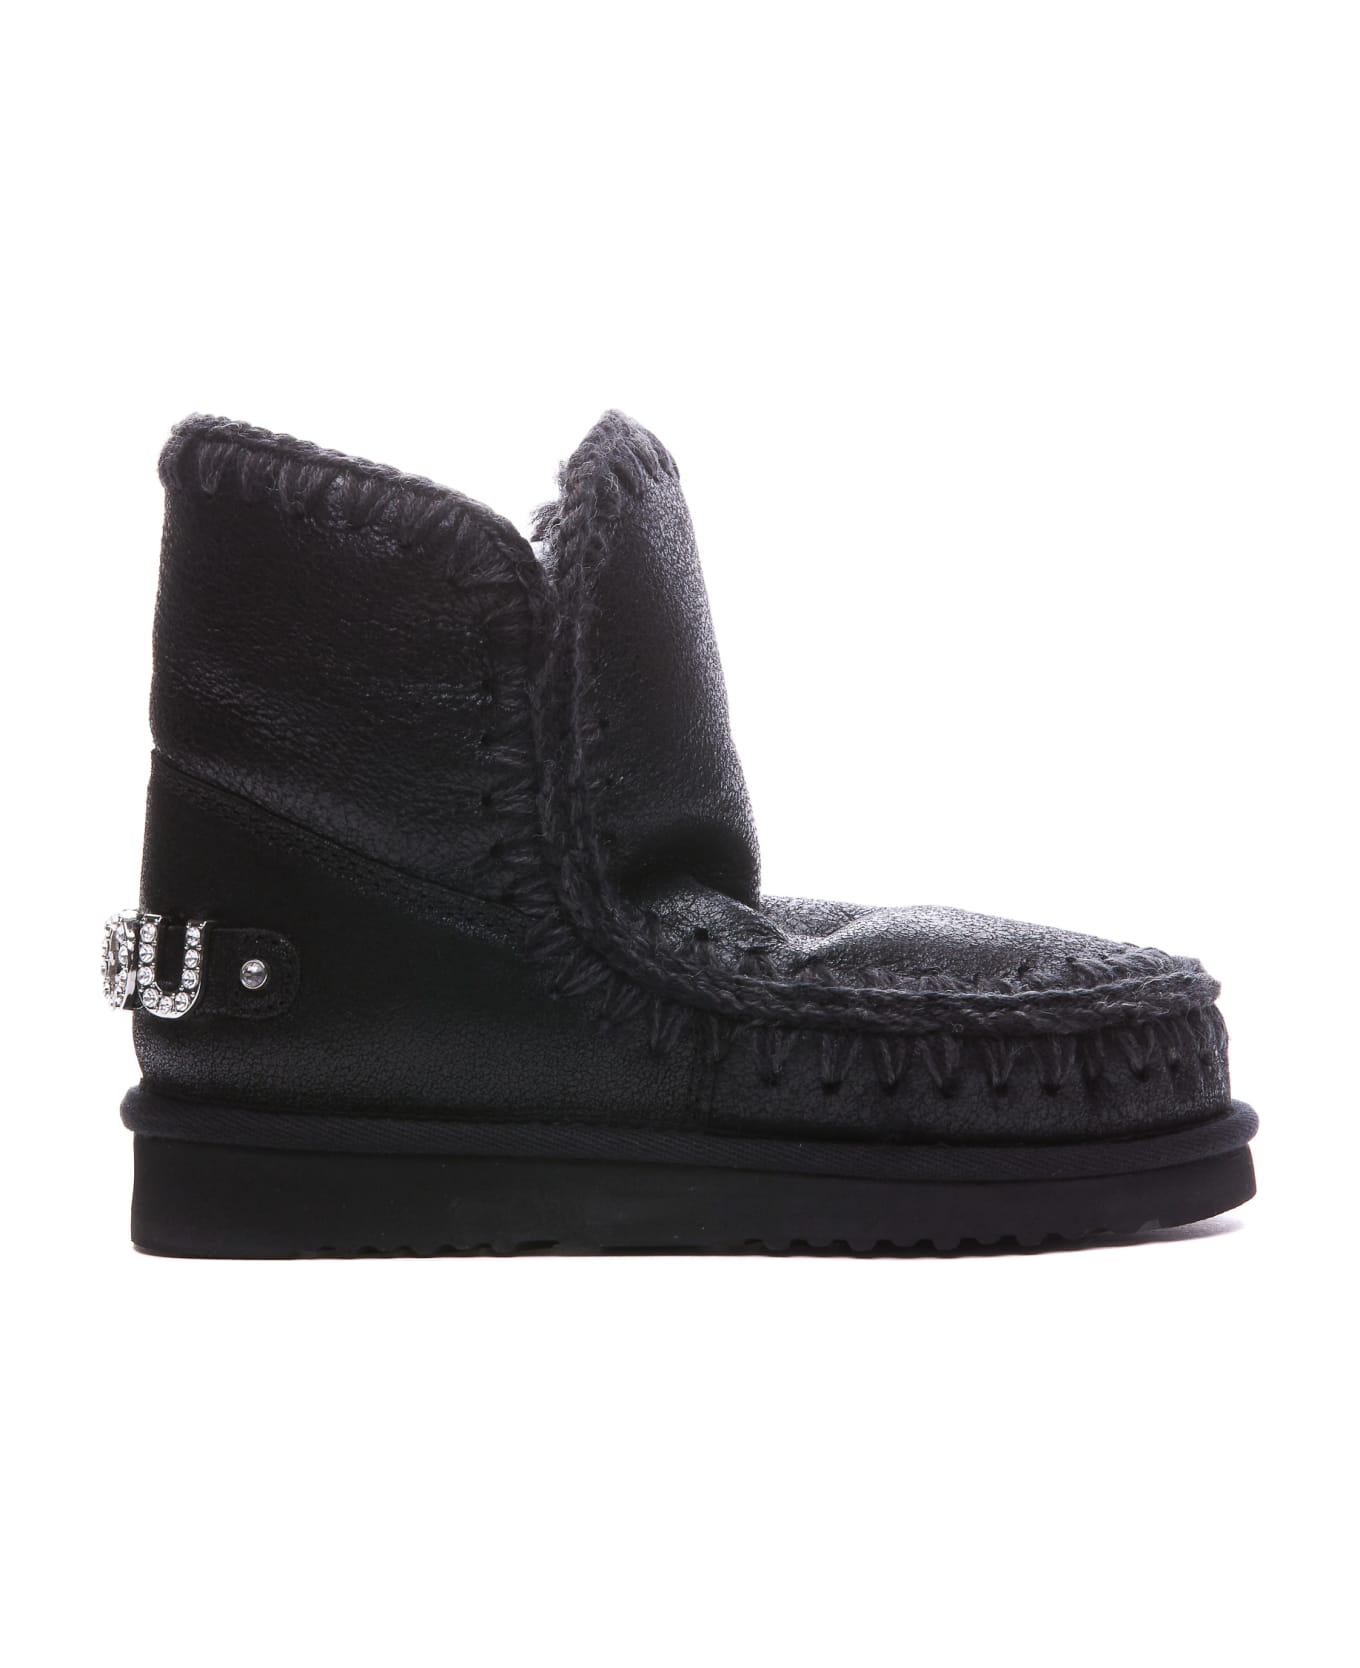 Mou Ankle Boots 'eskimo18' Made Of Leather - Nero